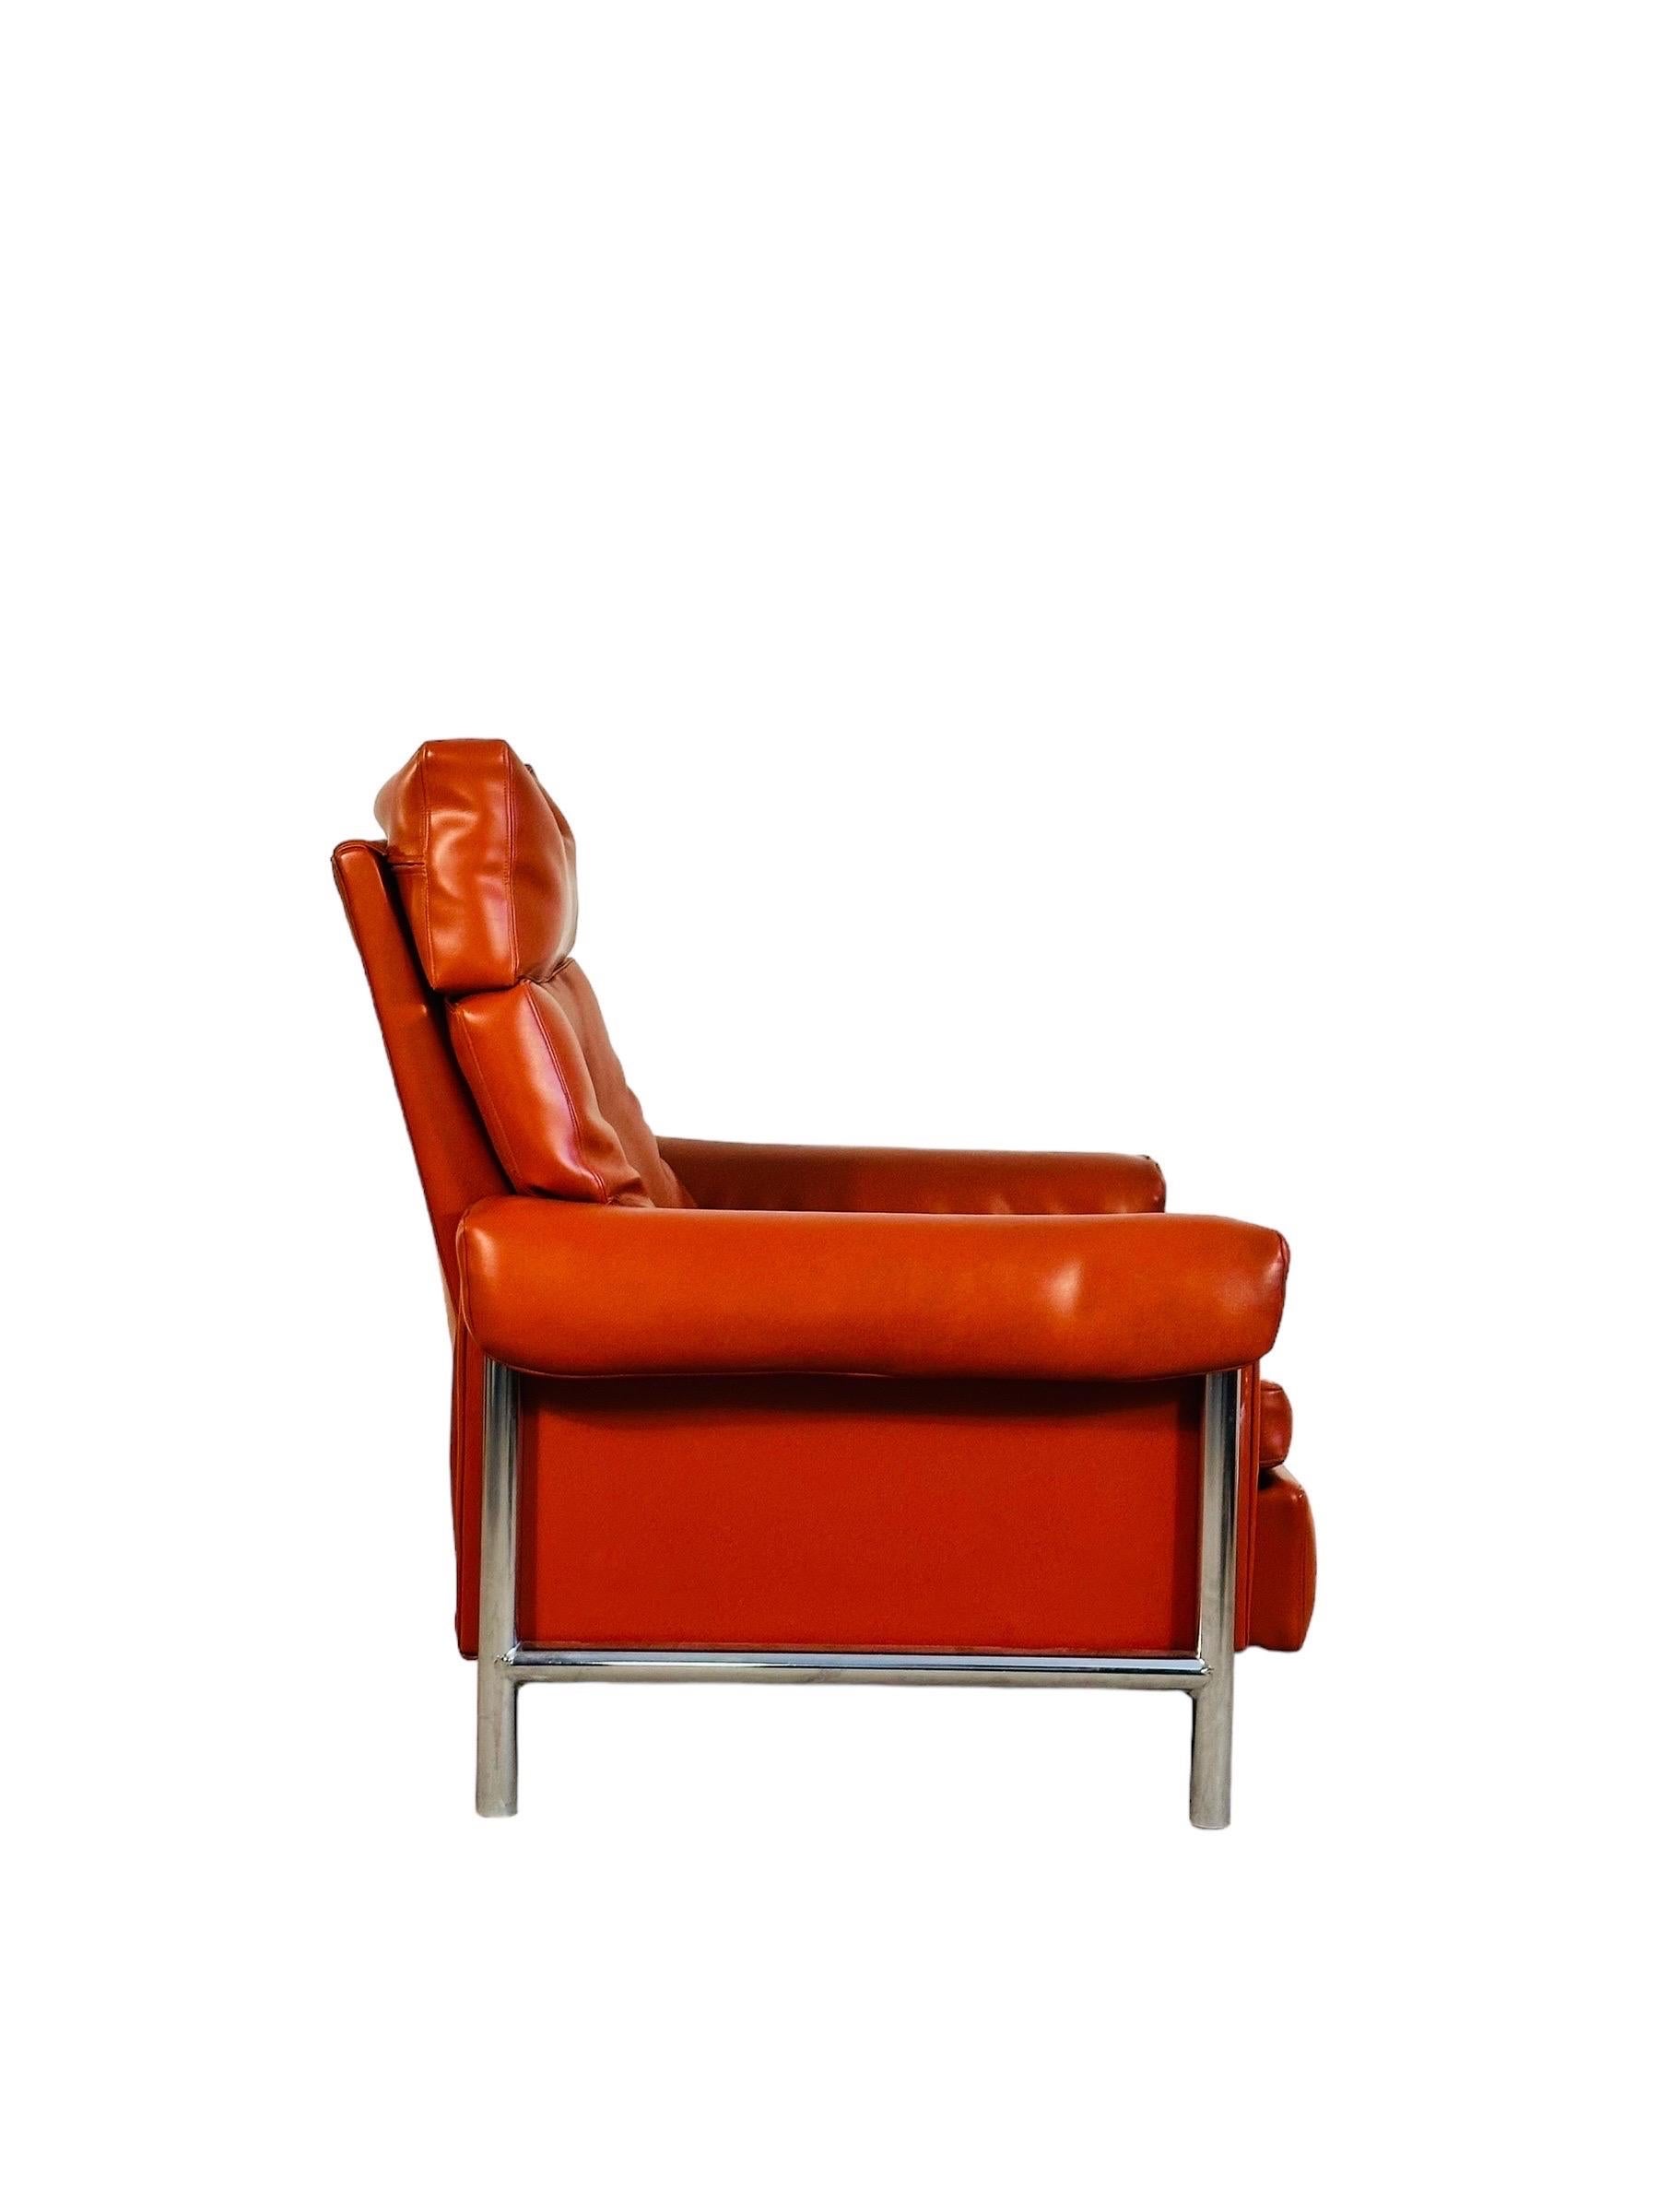 American Mid Century Modern Chrome Recliner Lounge Chair For Sale